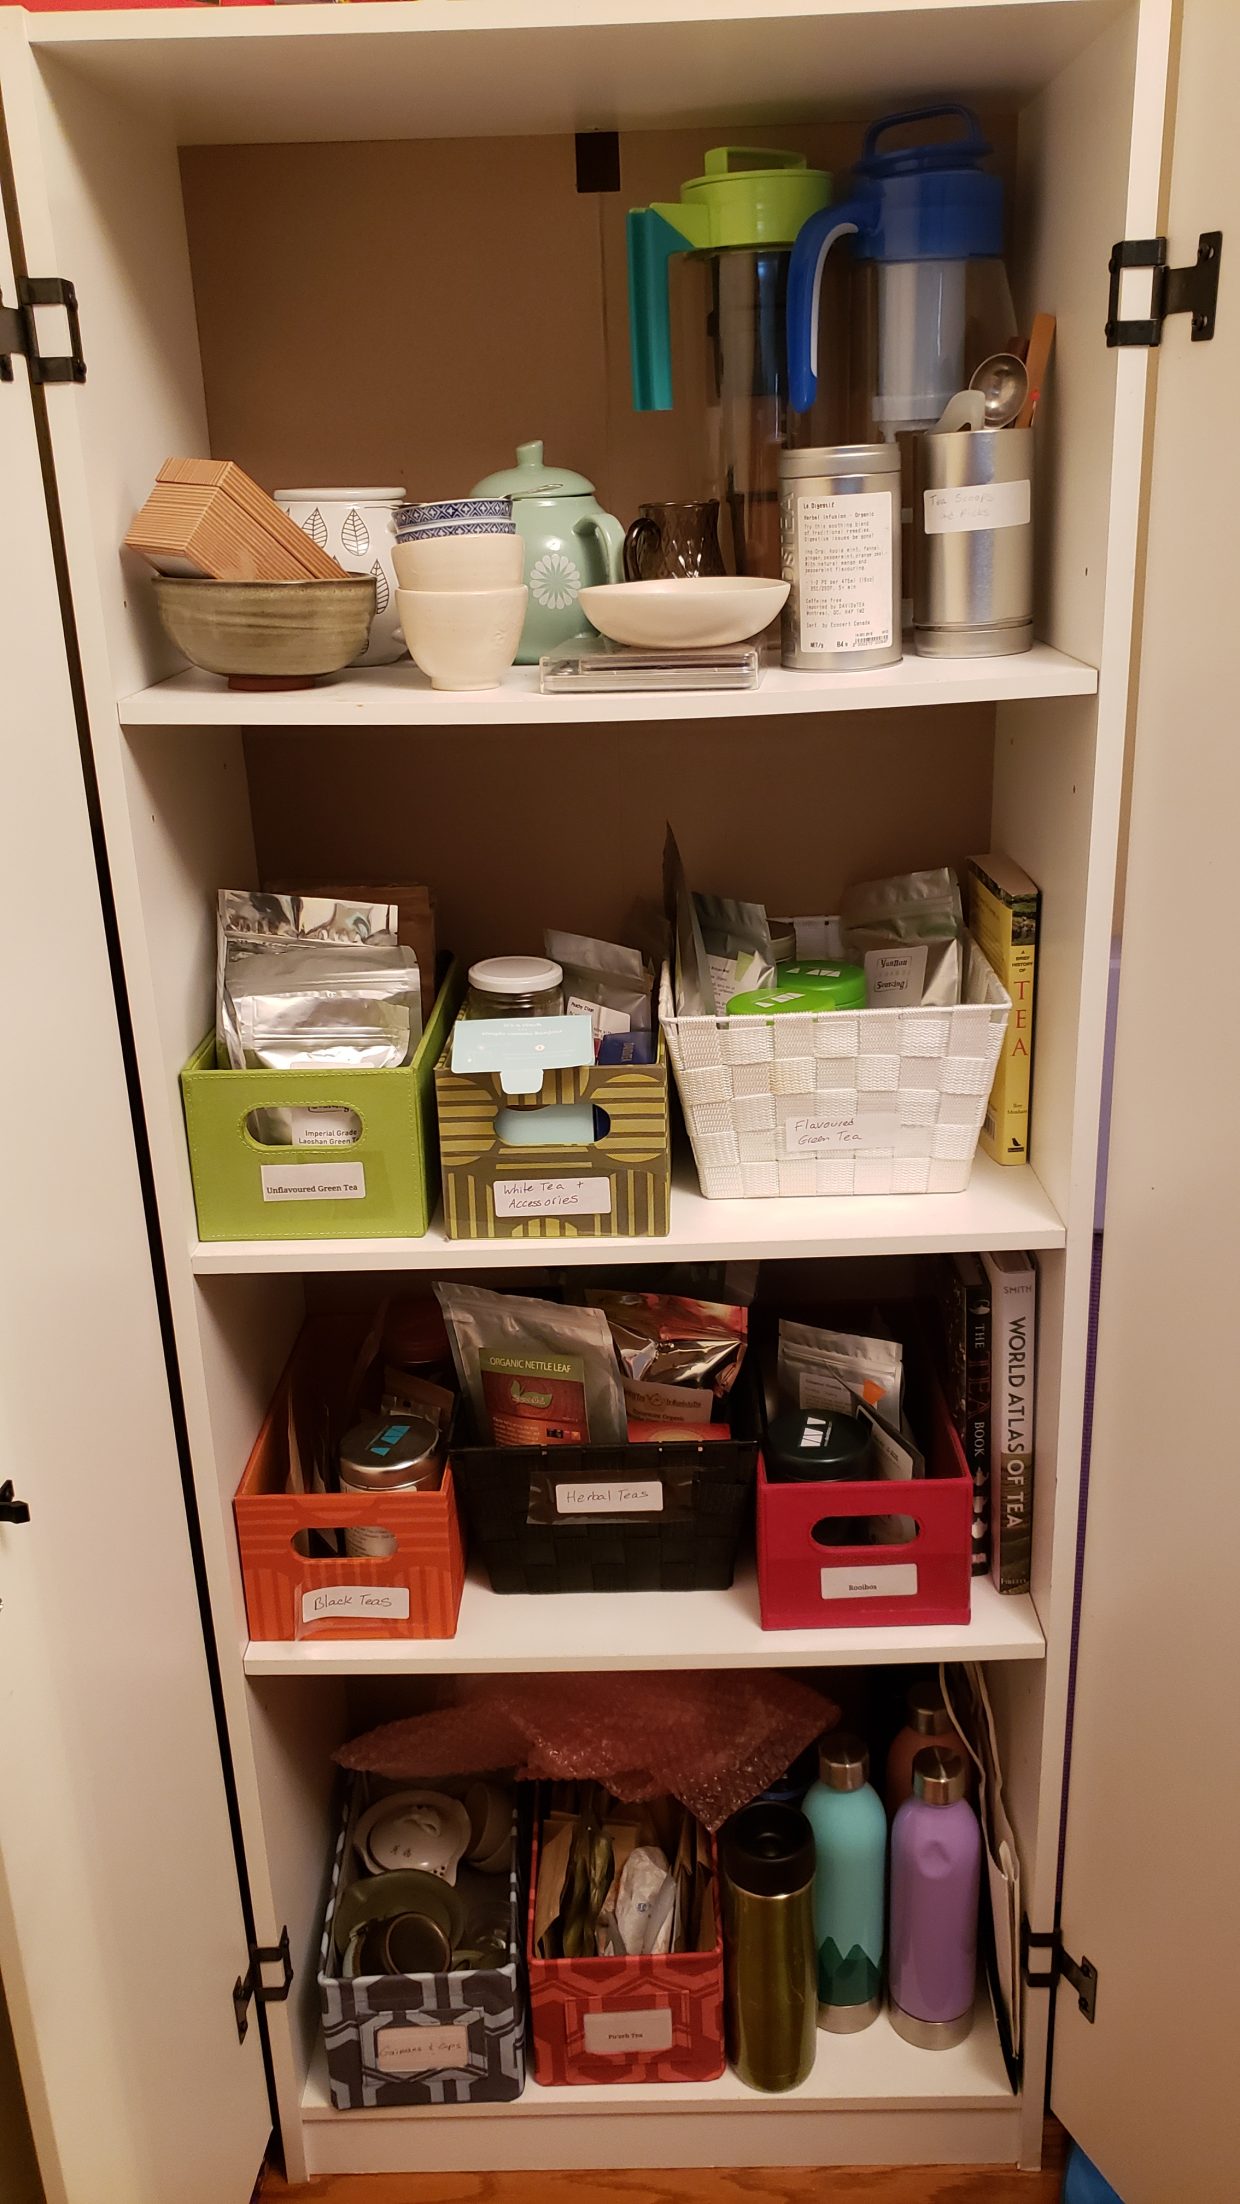 My tea collection in January 2020.